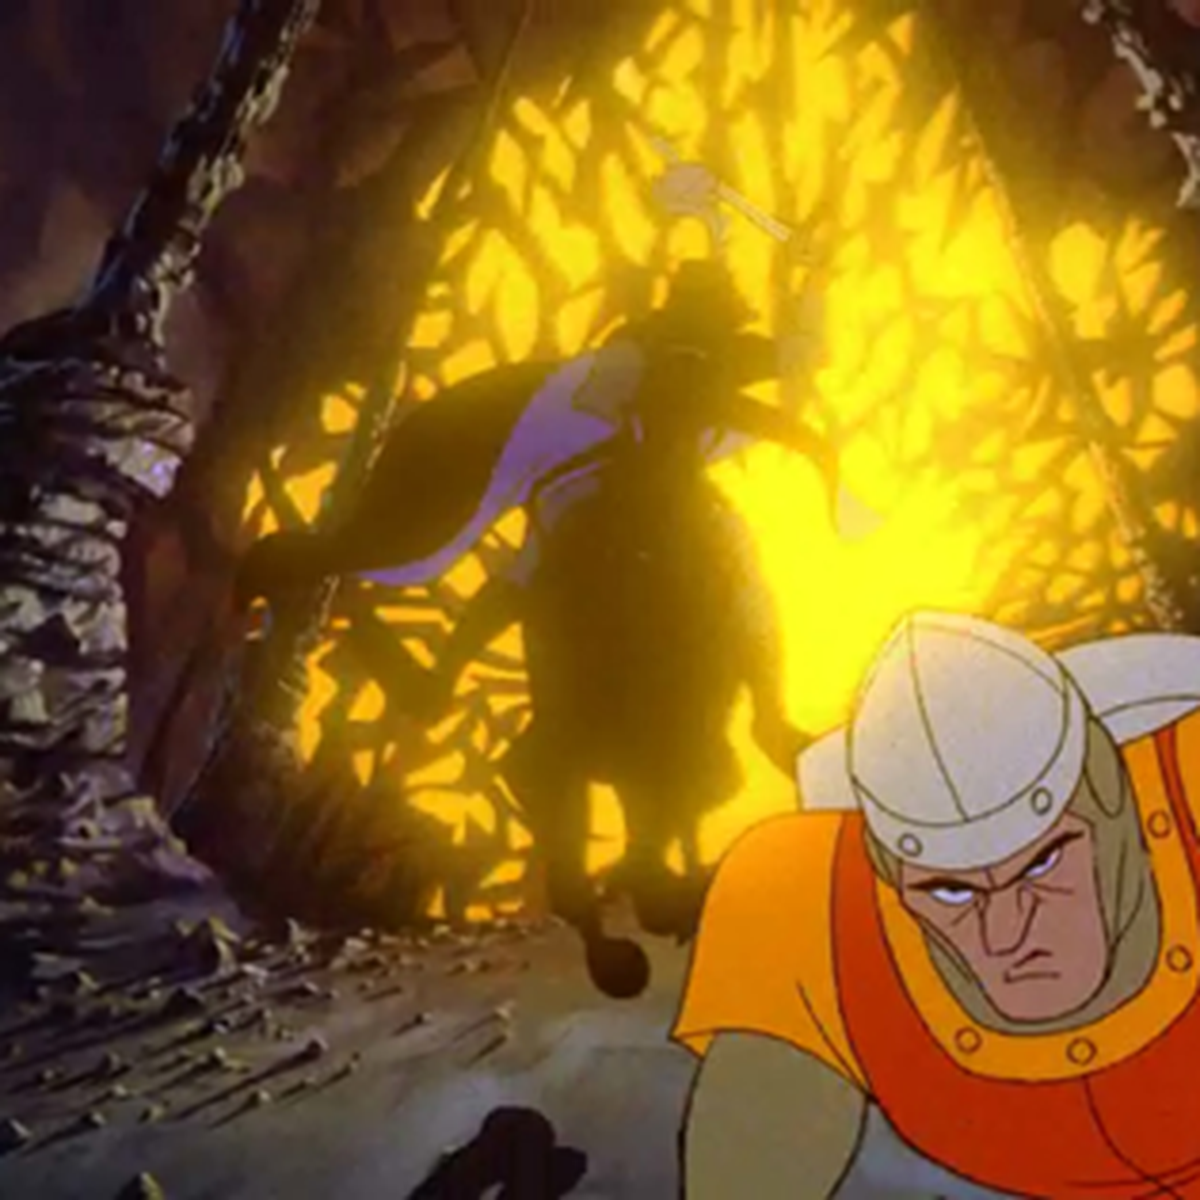 Classic Video Game 'Dragon's Lair' Comes to OS X - MacRumors